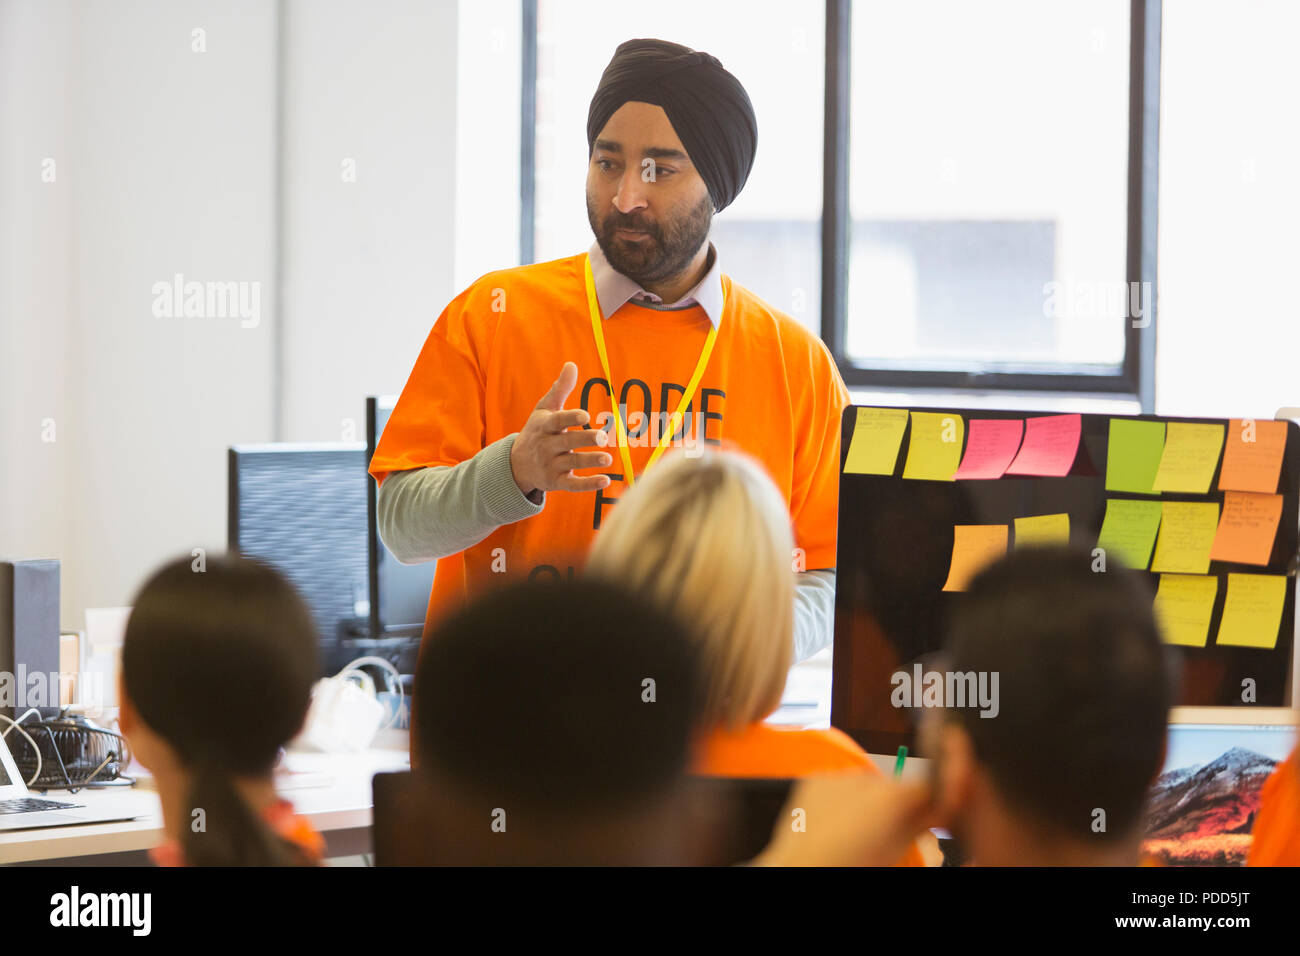 Hacker in turban leading meeting, coding for charity at hackathon Stock Photo